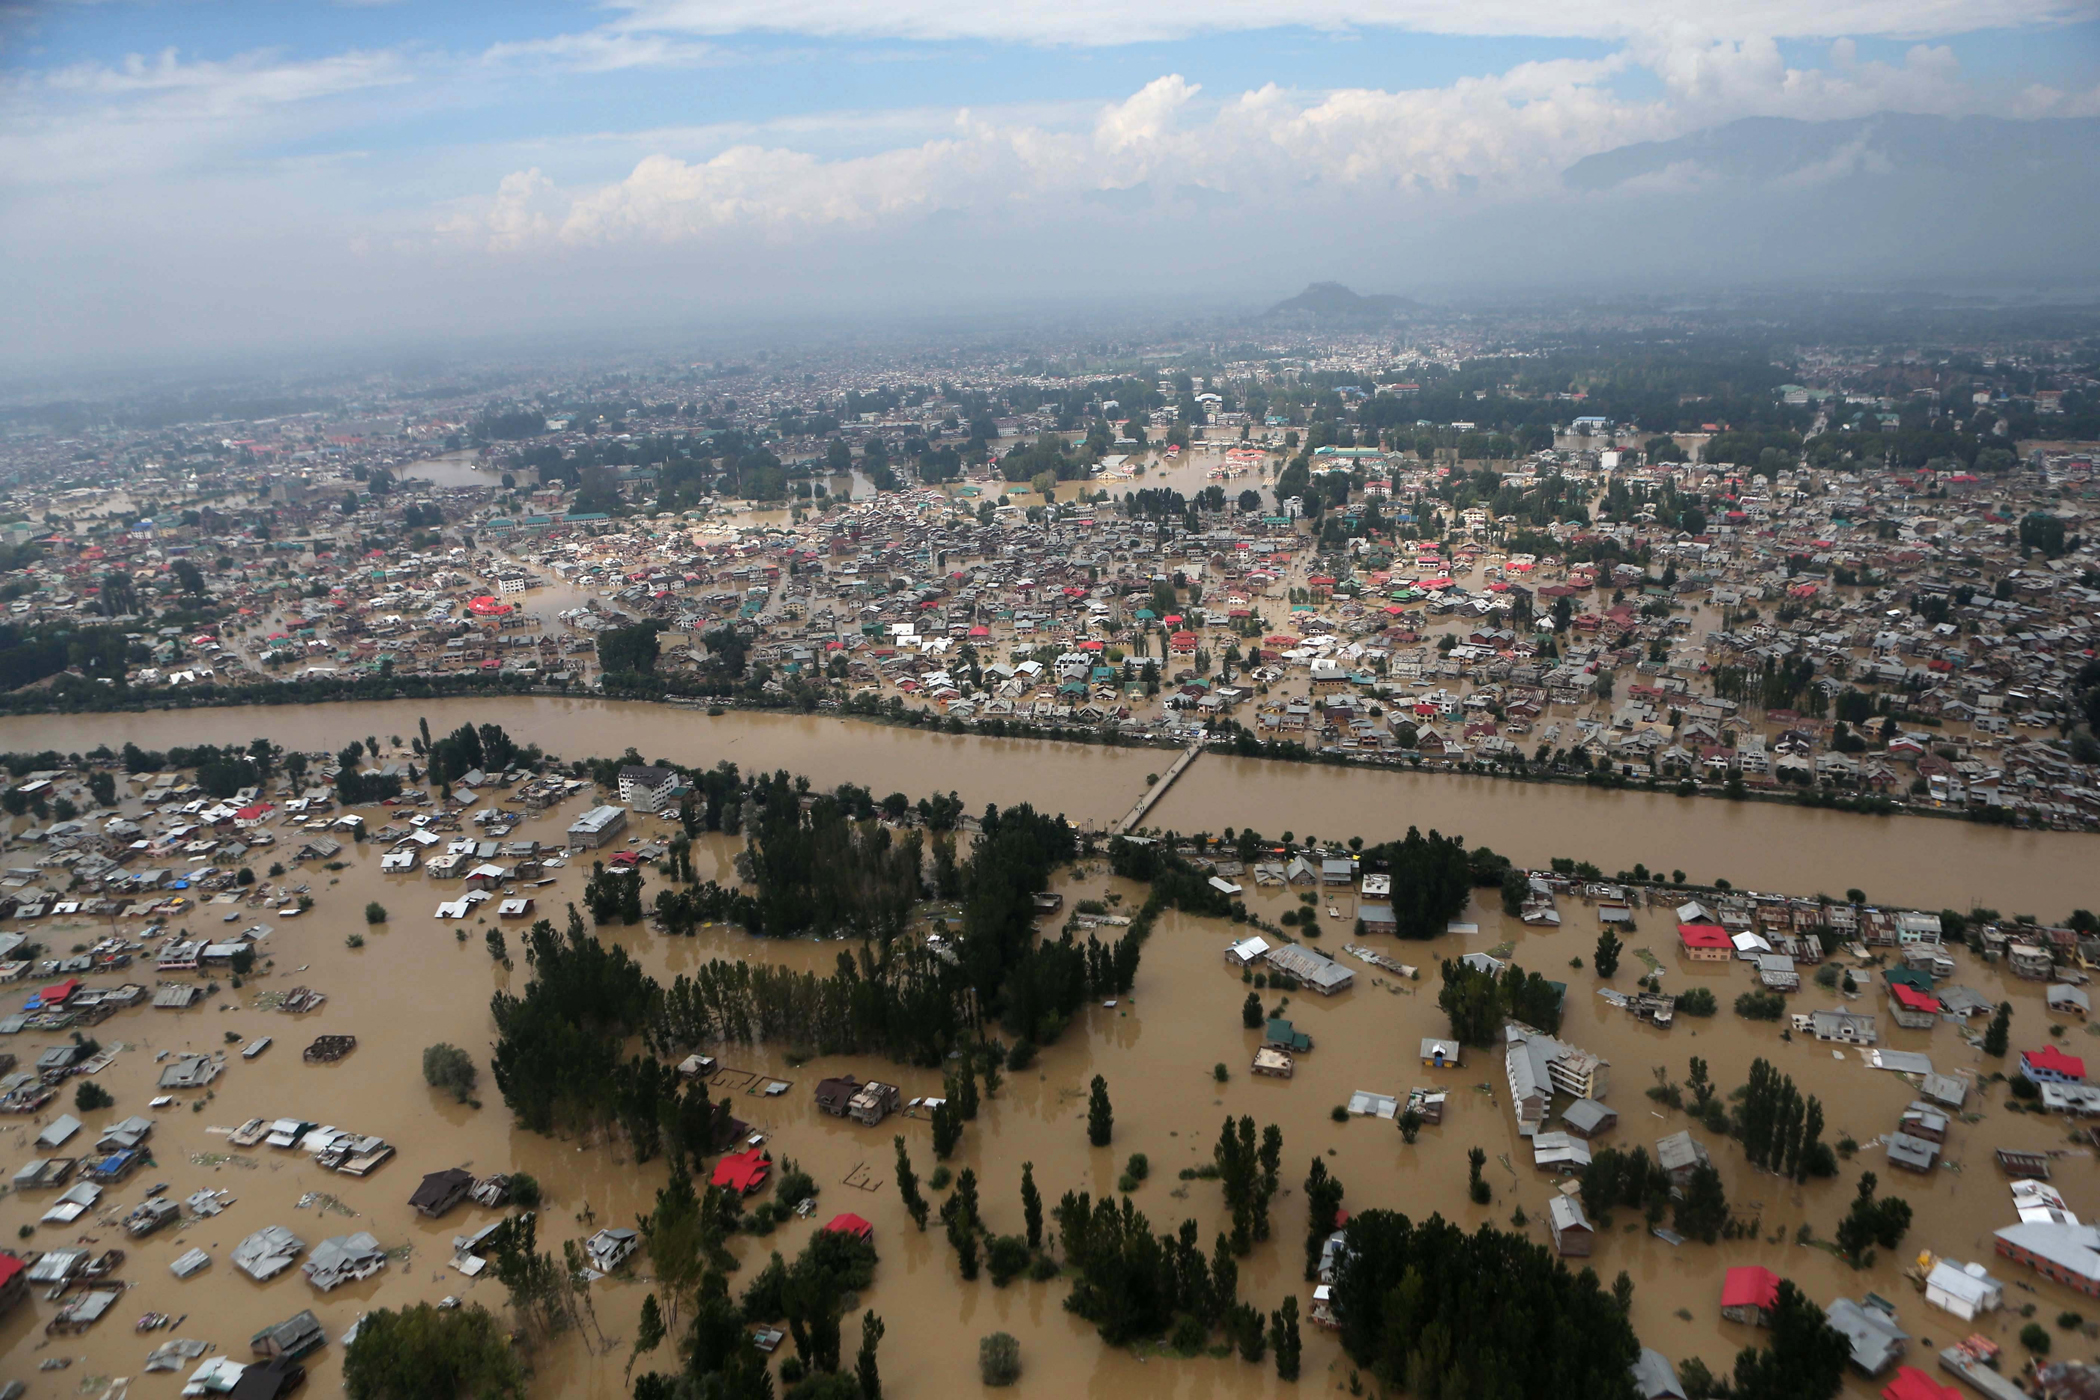 An aerial view shows buildings submerged in floodwaters in Srinagar, in Indian Kashmir, Sept. 9, 2014.